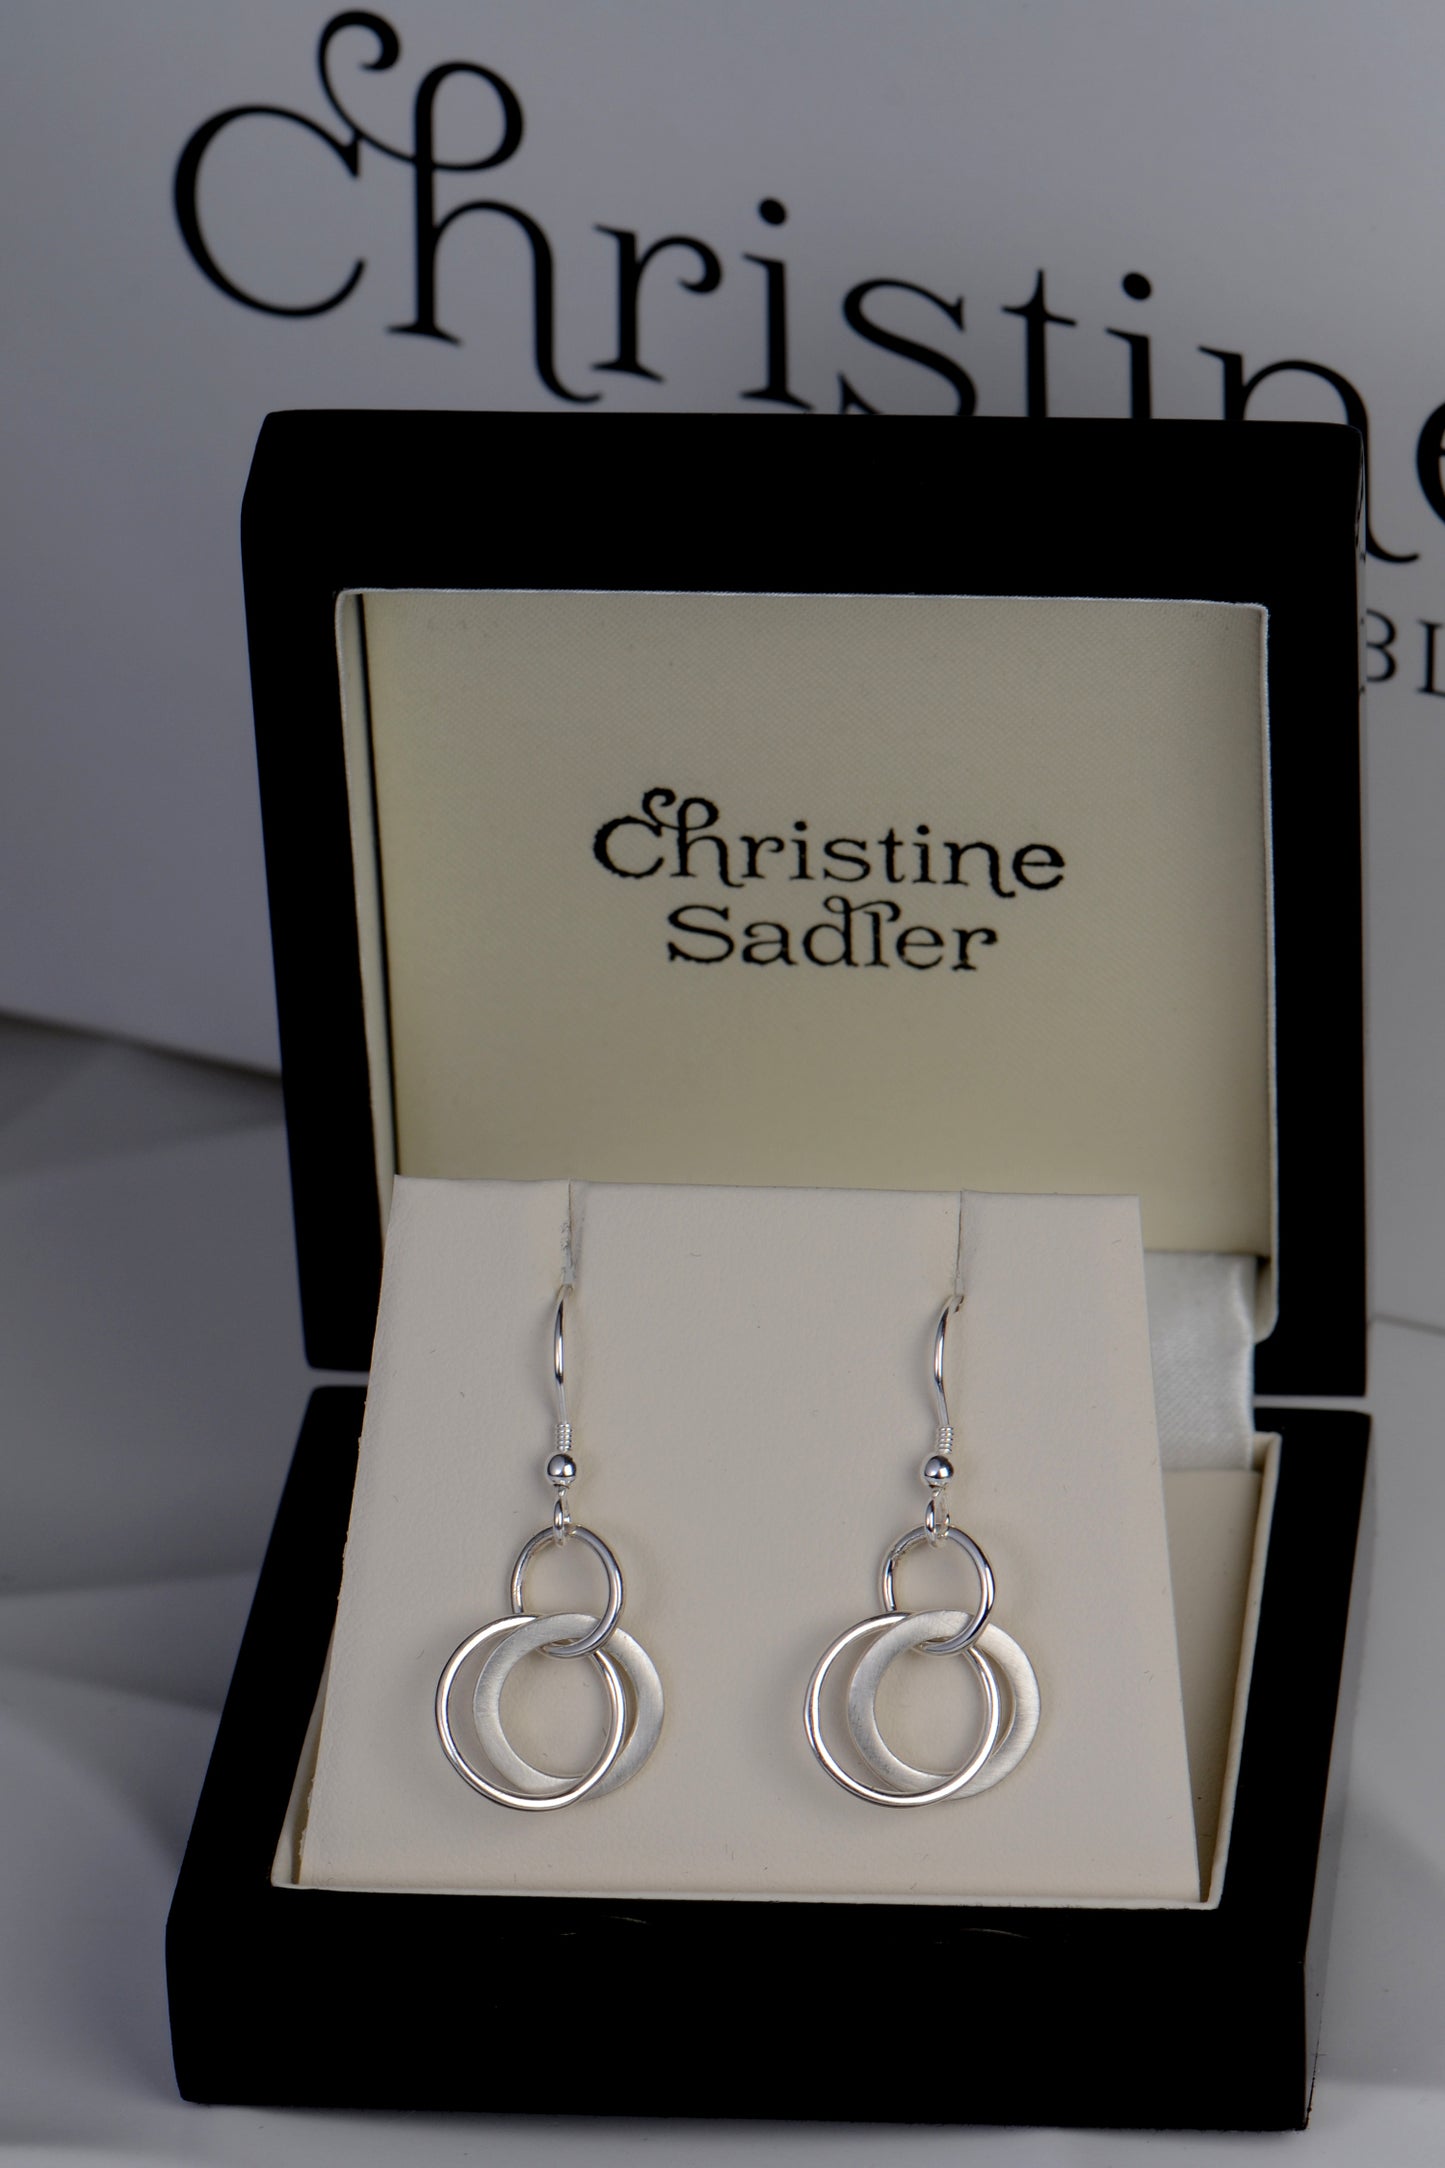 handmade silver circles earrings with hook fittings